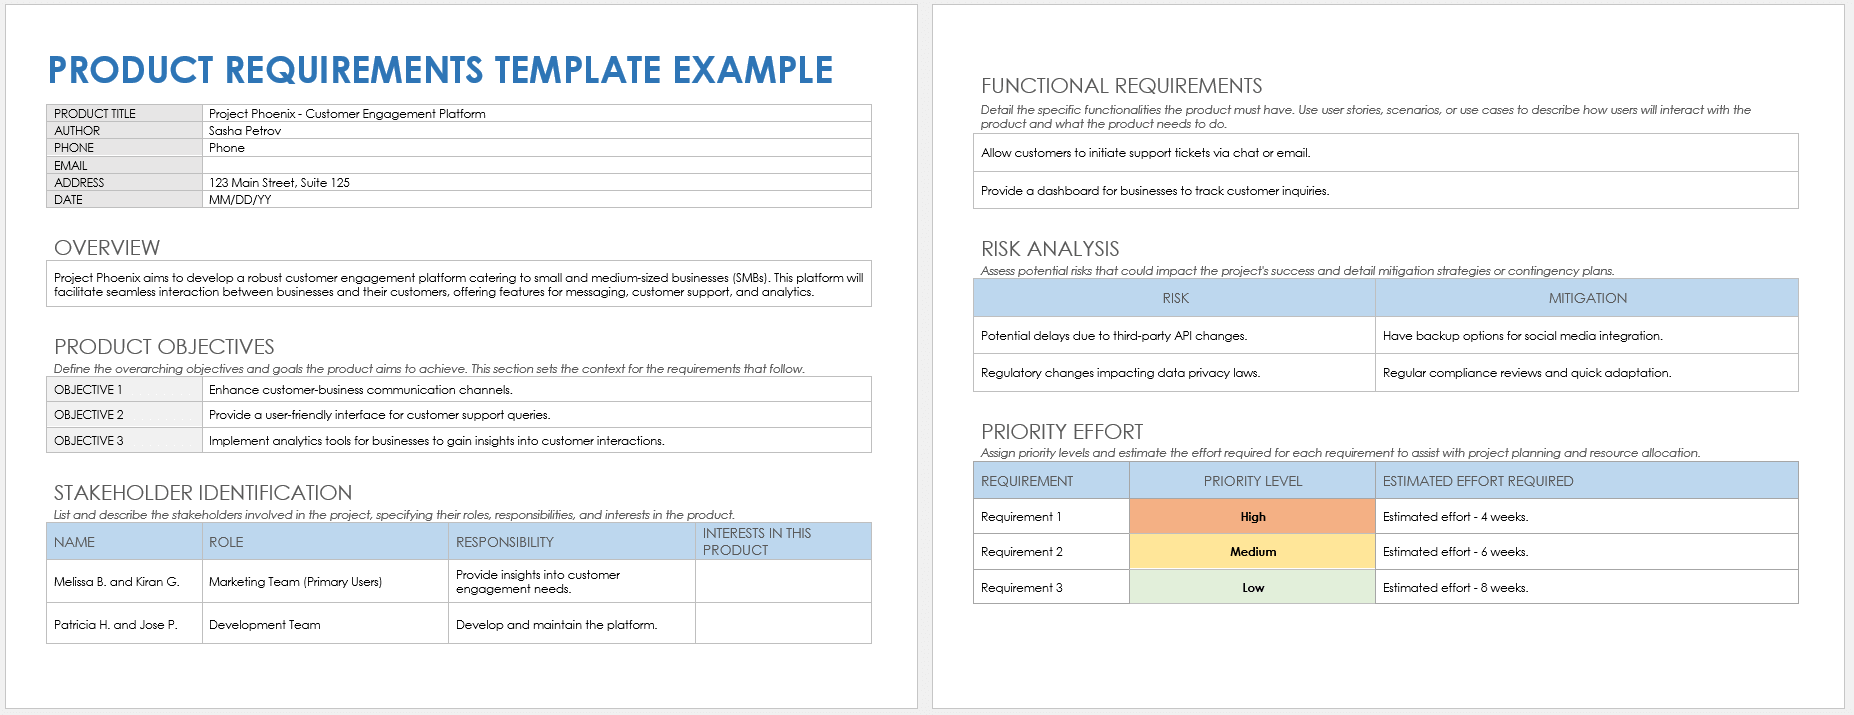 Product Requirements Example Template